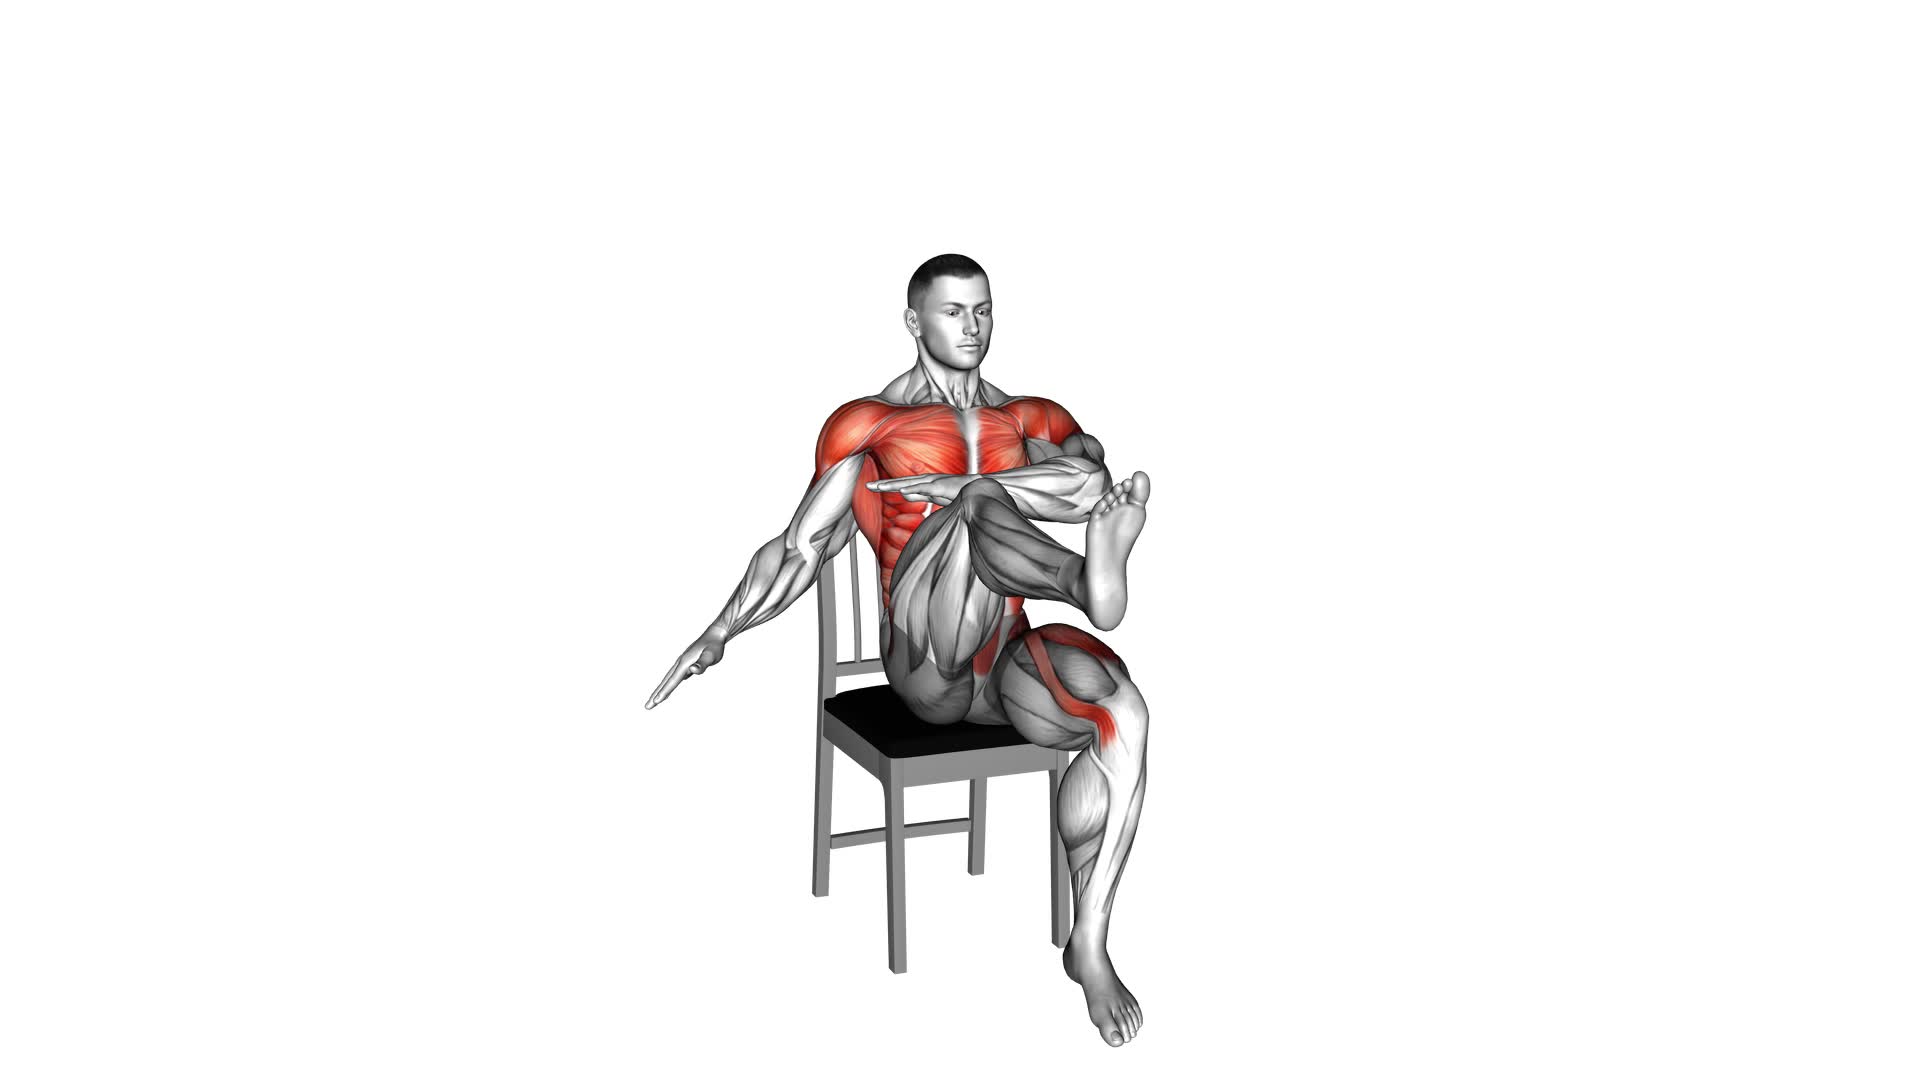 Circle Arms Knee Raises on Chair (male) - Video Exercise Guide & Tips